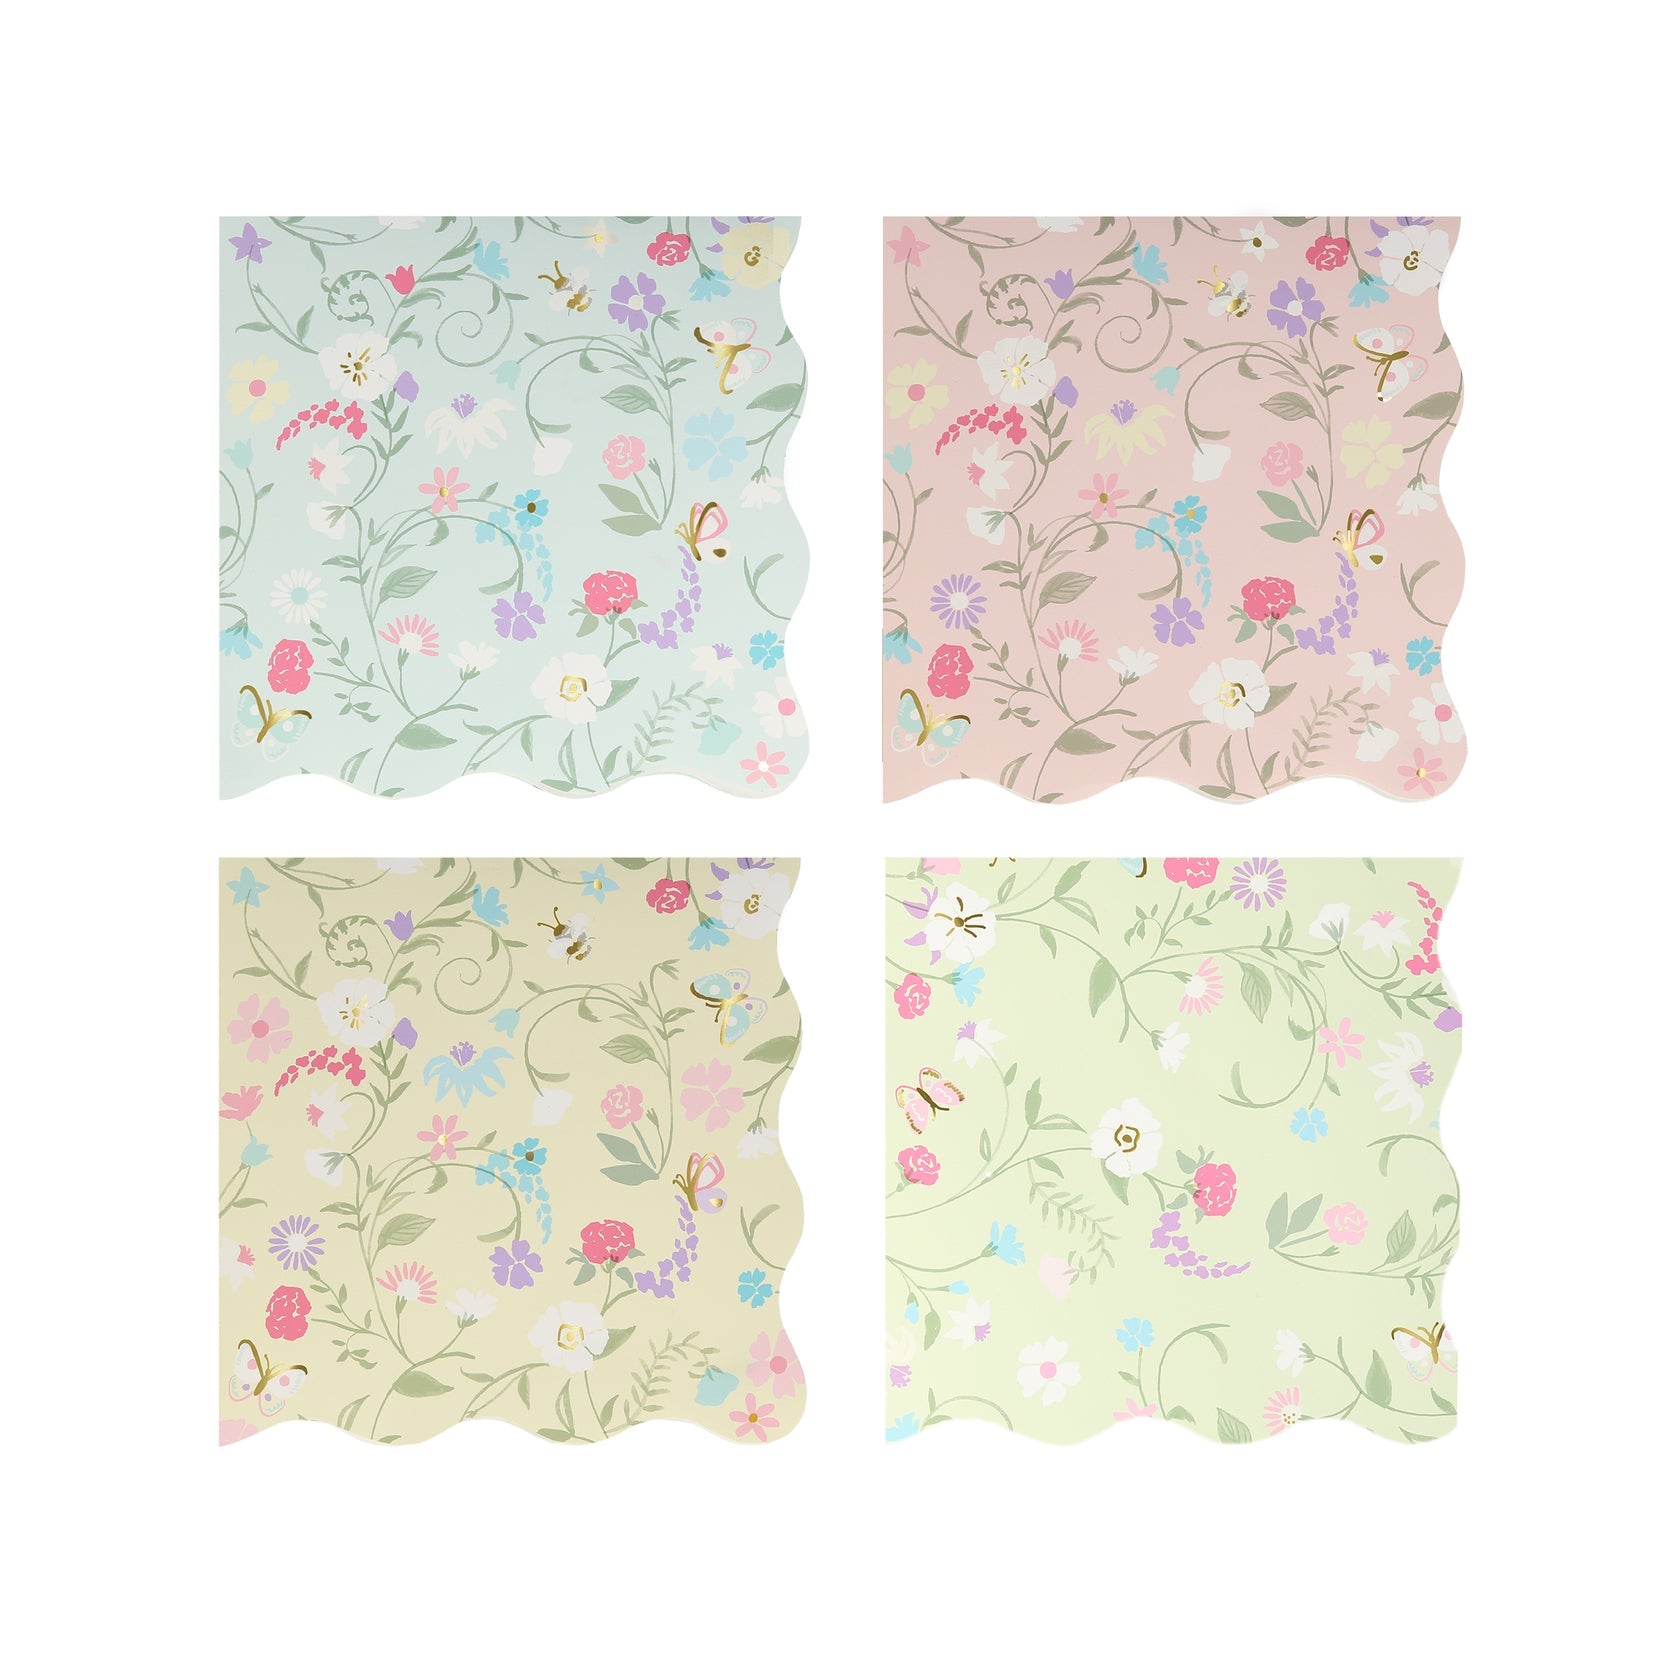 A set of four Meri Meri Ladurée Floral Small Napkins with scalloped borders and flowers on them.